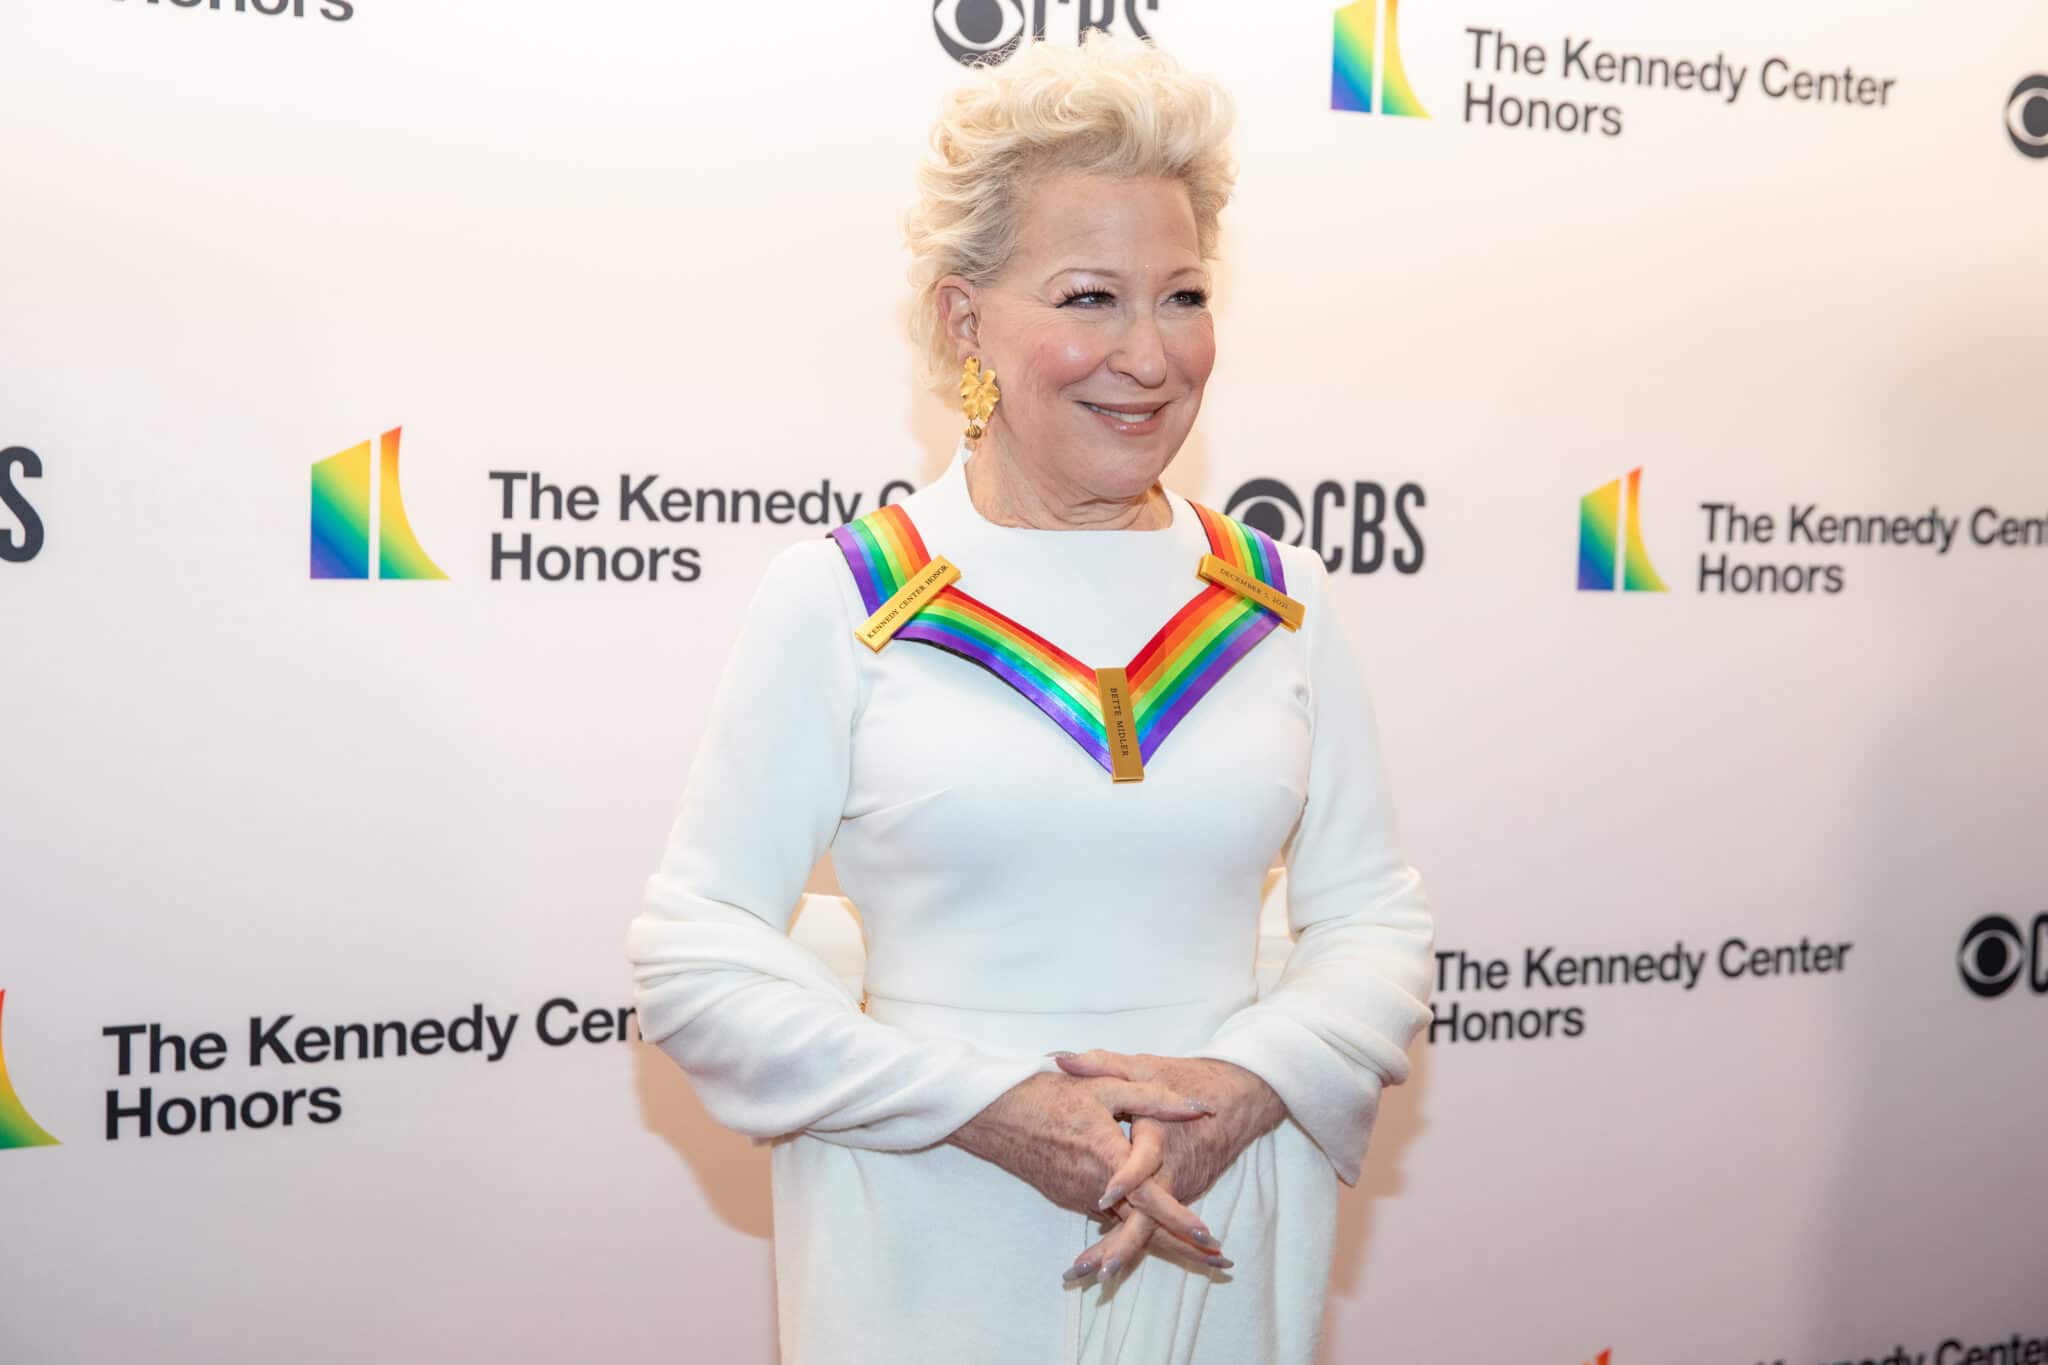 Bette Midler disappoints fans after parroting anti-trans dog whistles about ‘women being erased’